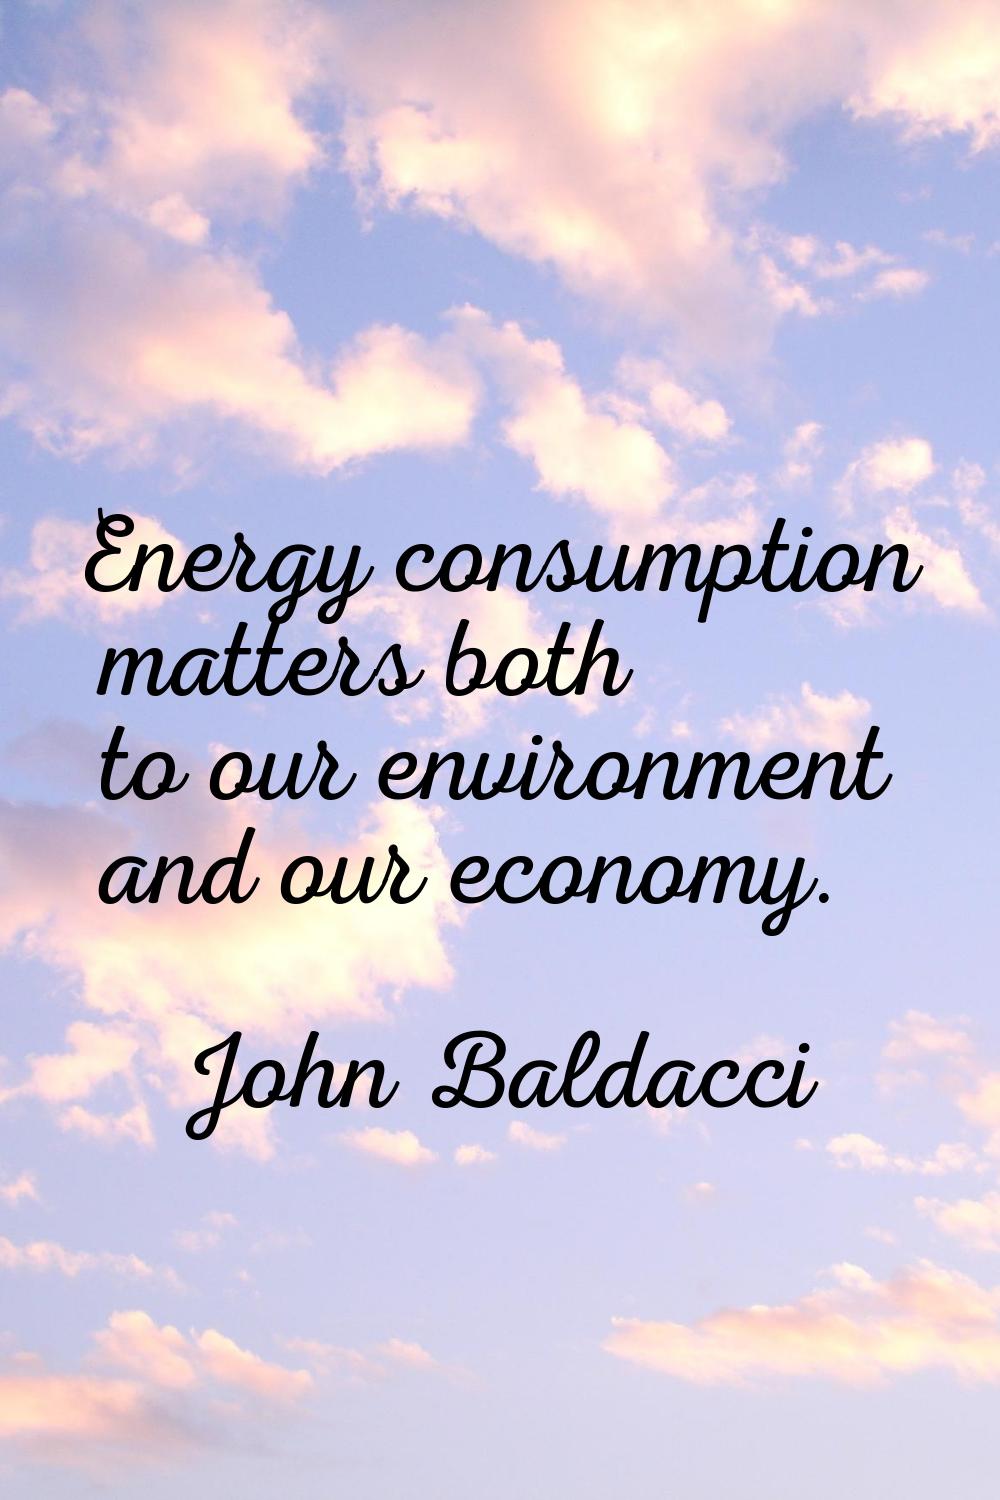 Energy consumption matters both to our environment and our economy.